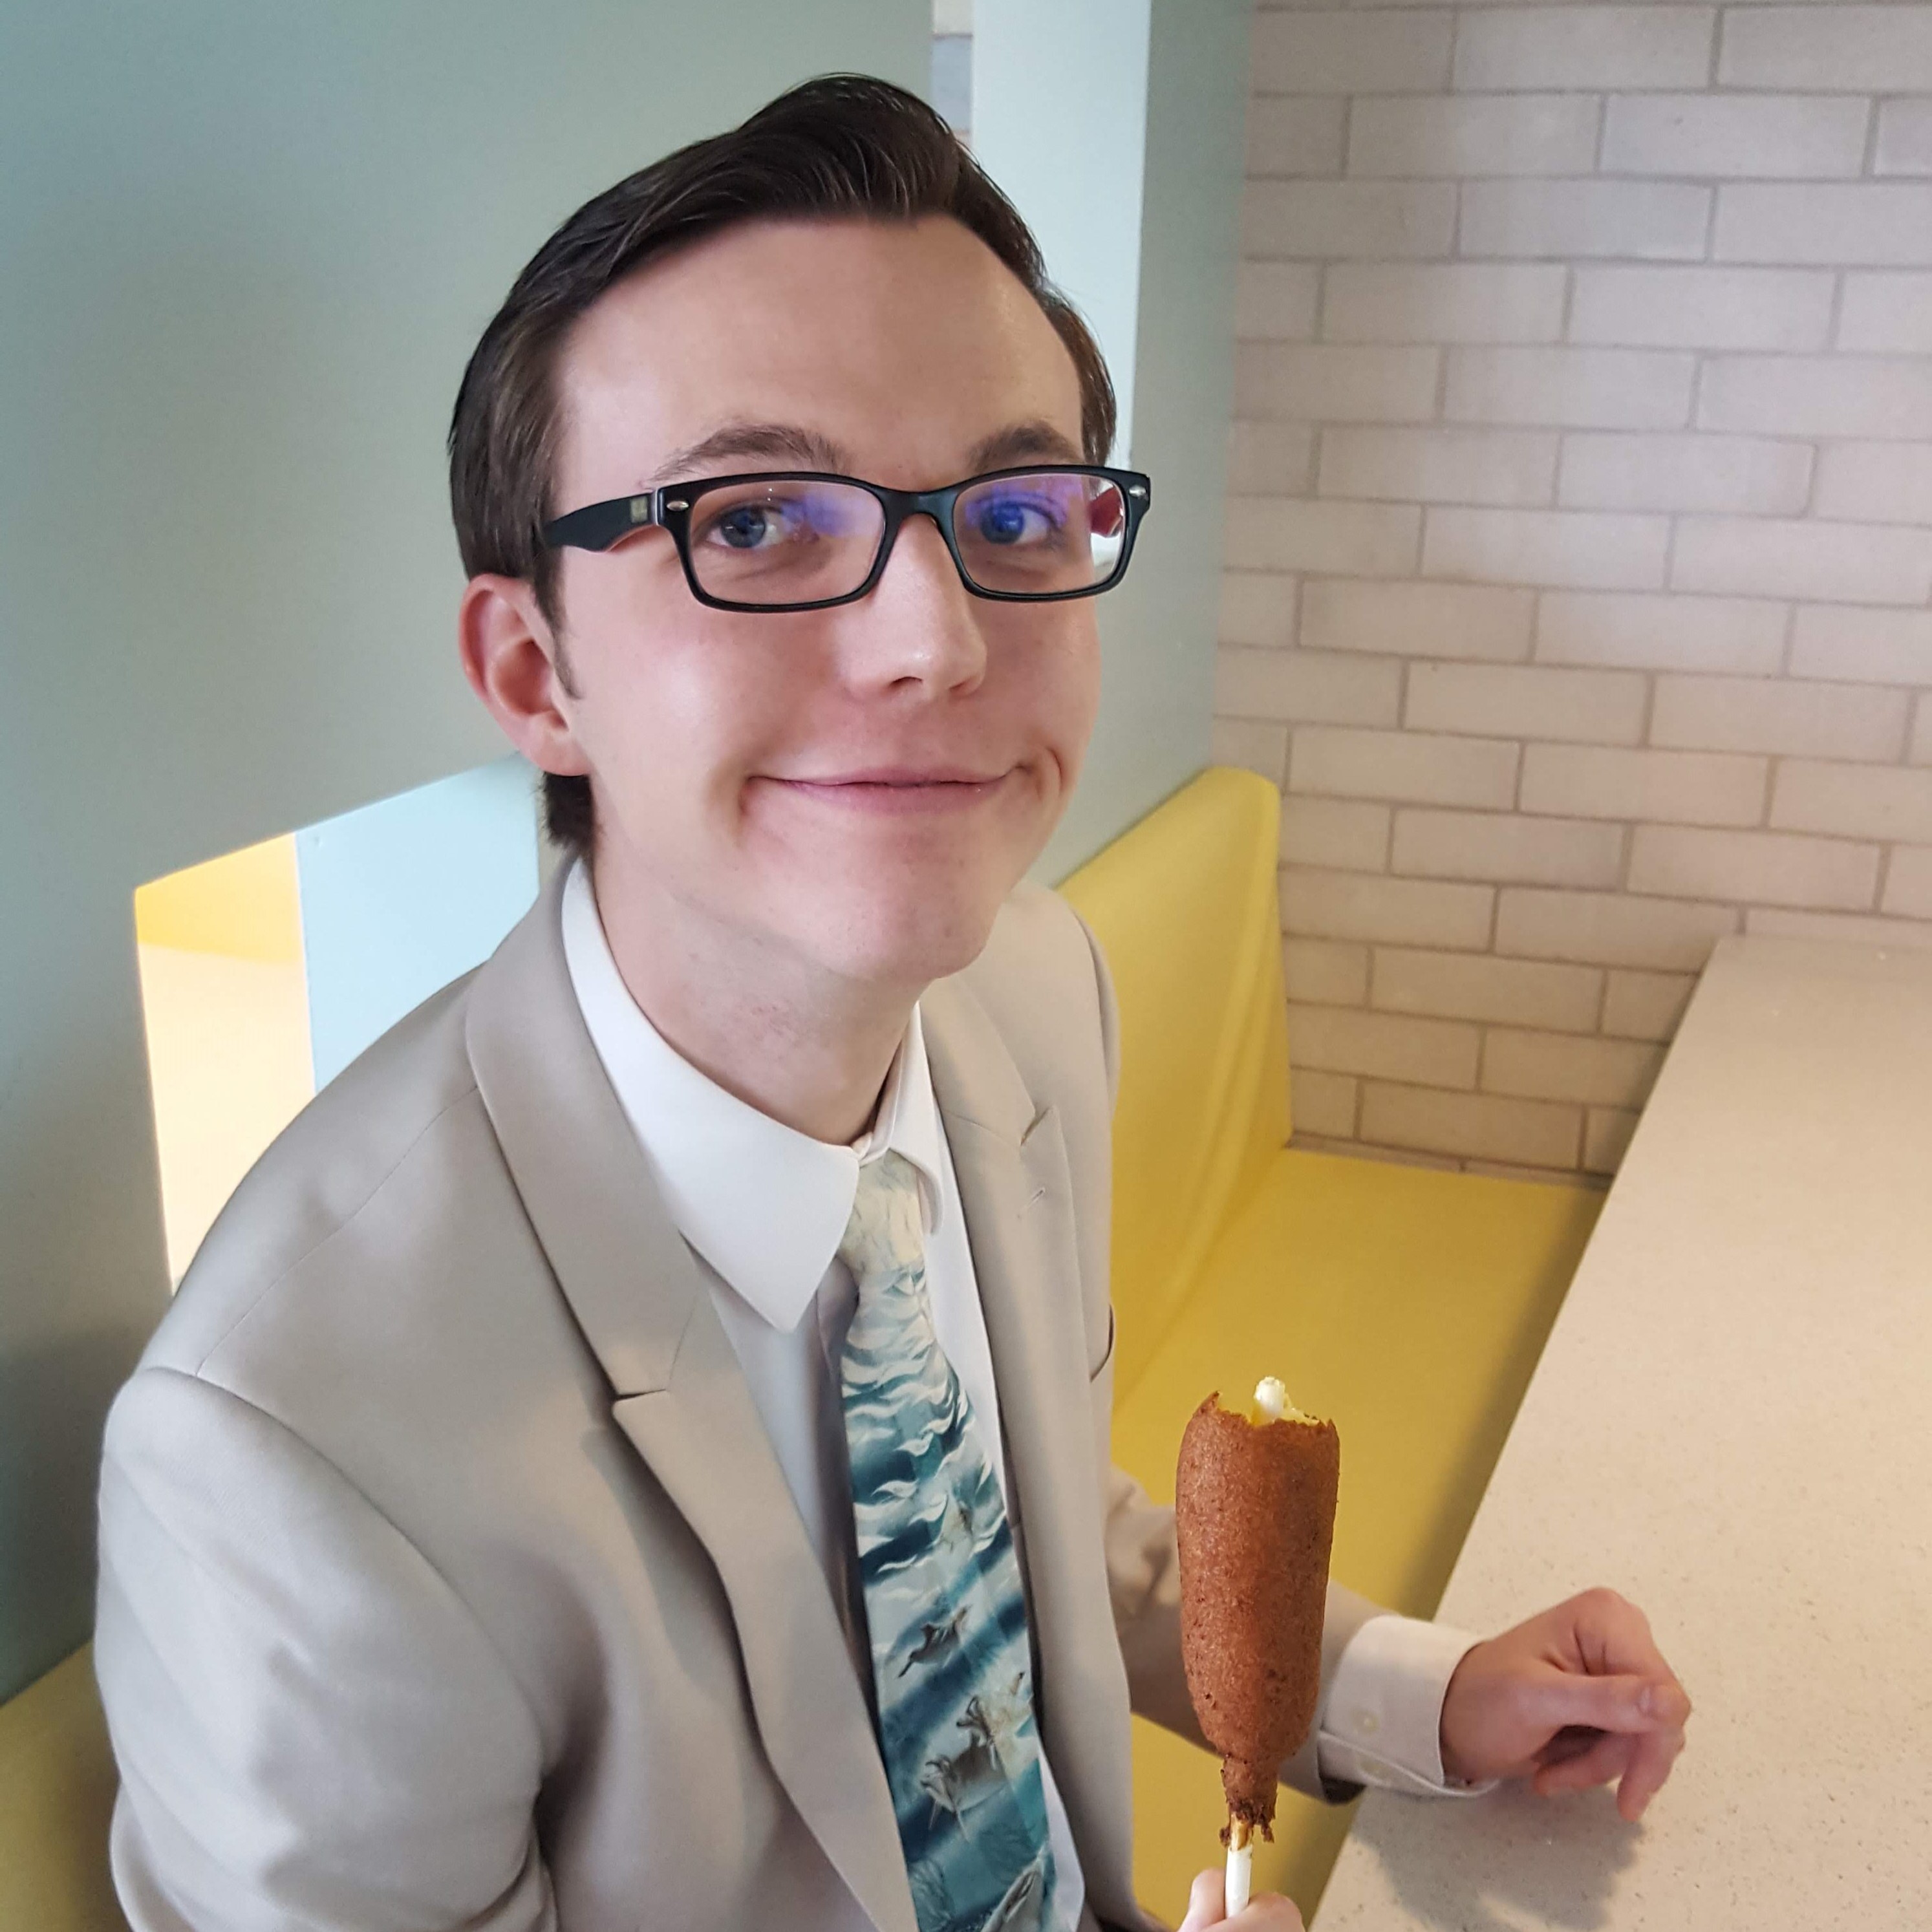 Photo of me in a tan suit eating a corn dog